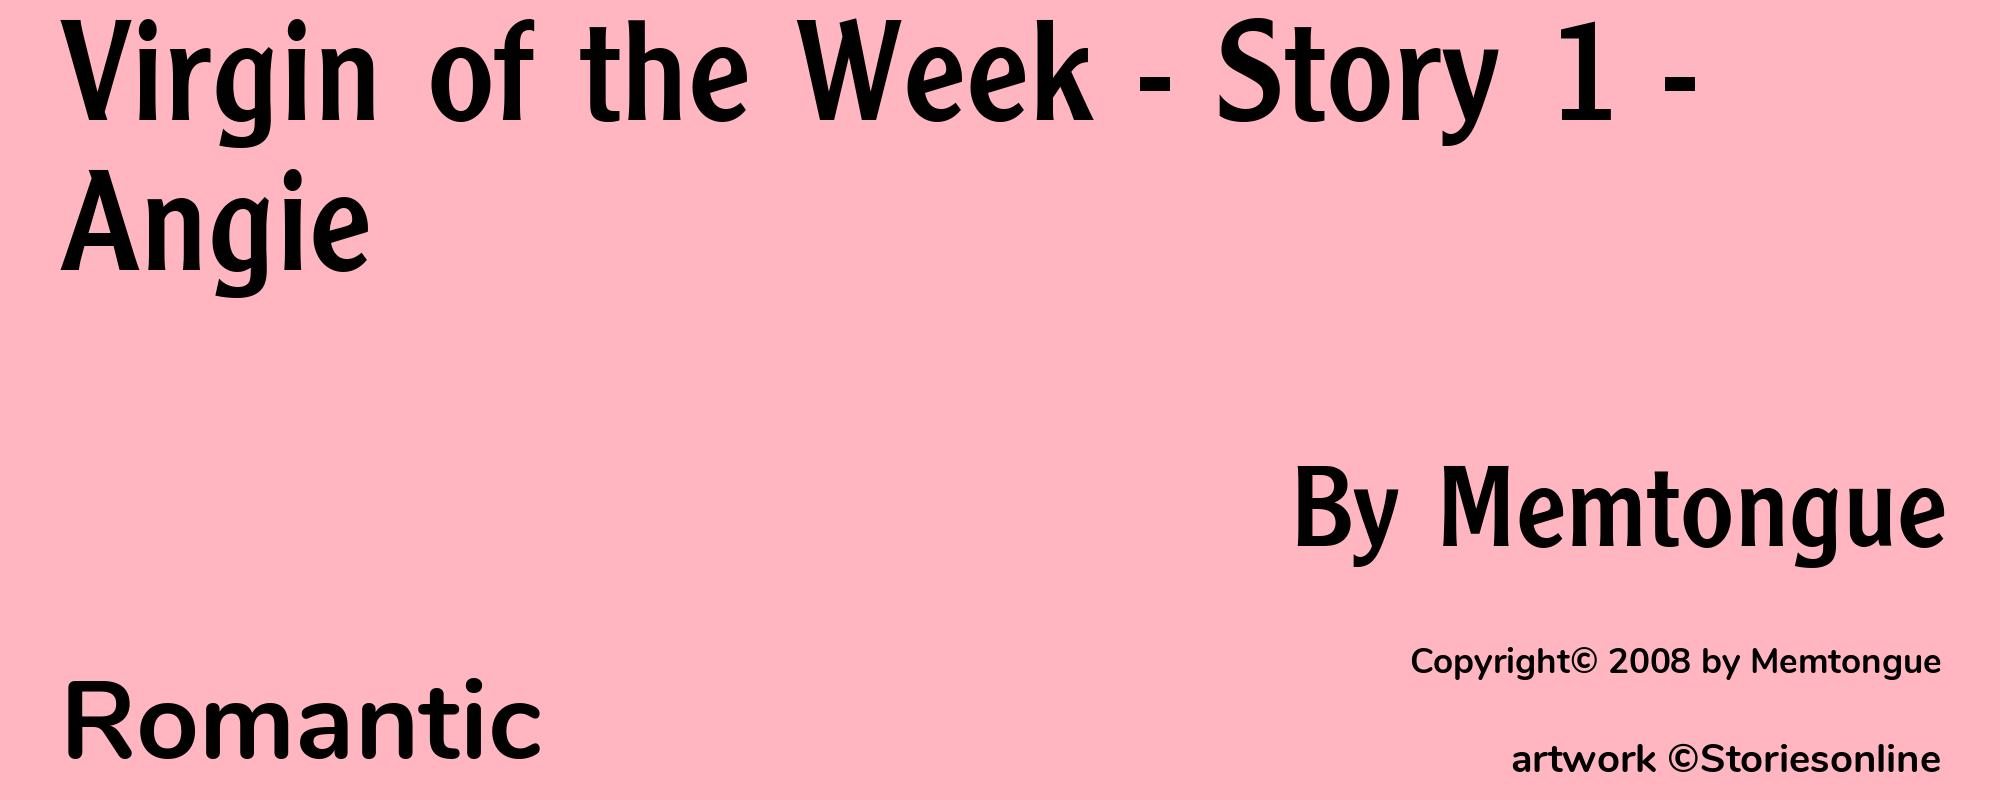 Virgin of the Week - Story 1 - Angie - Cover